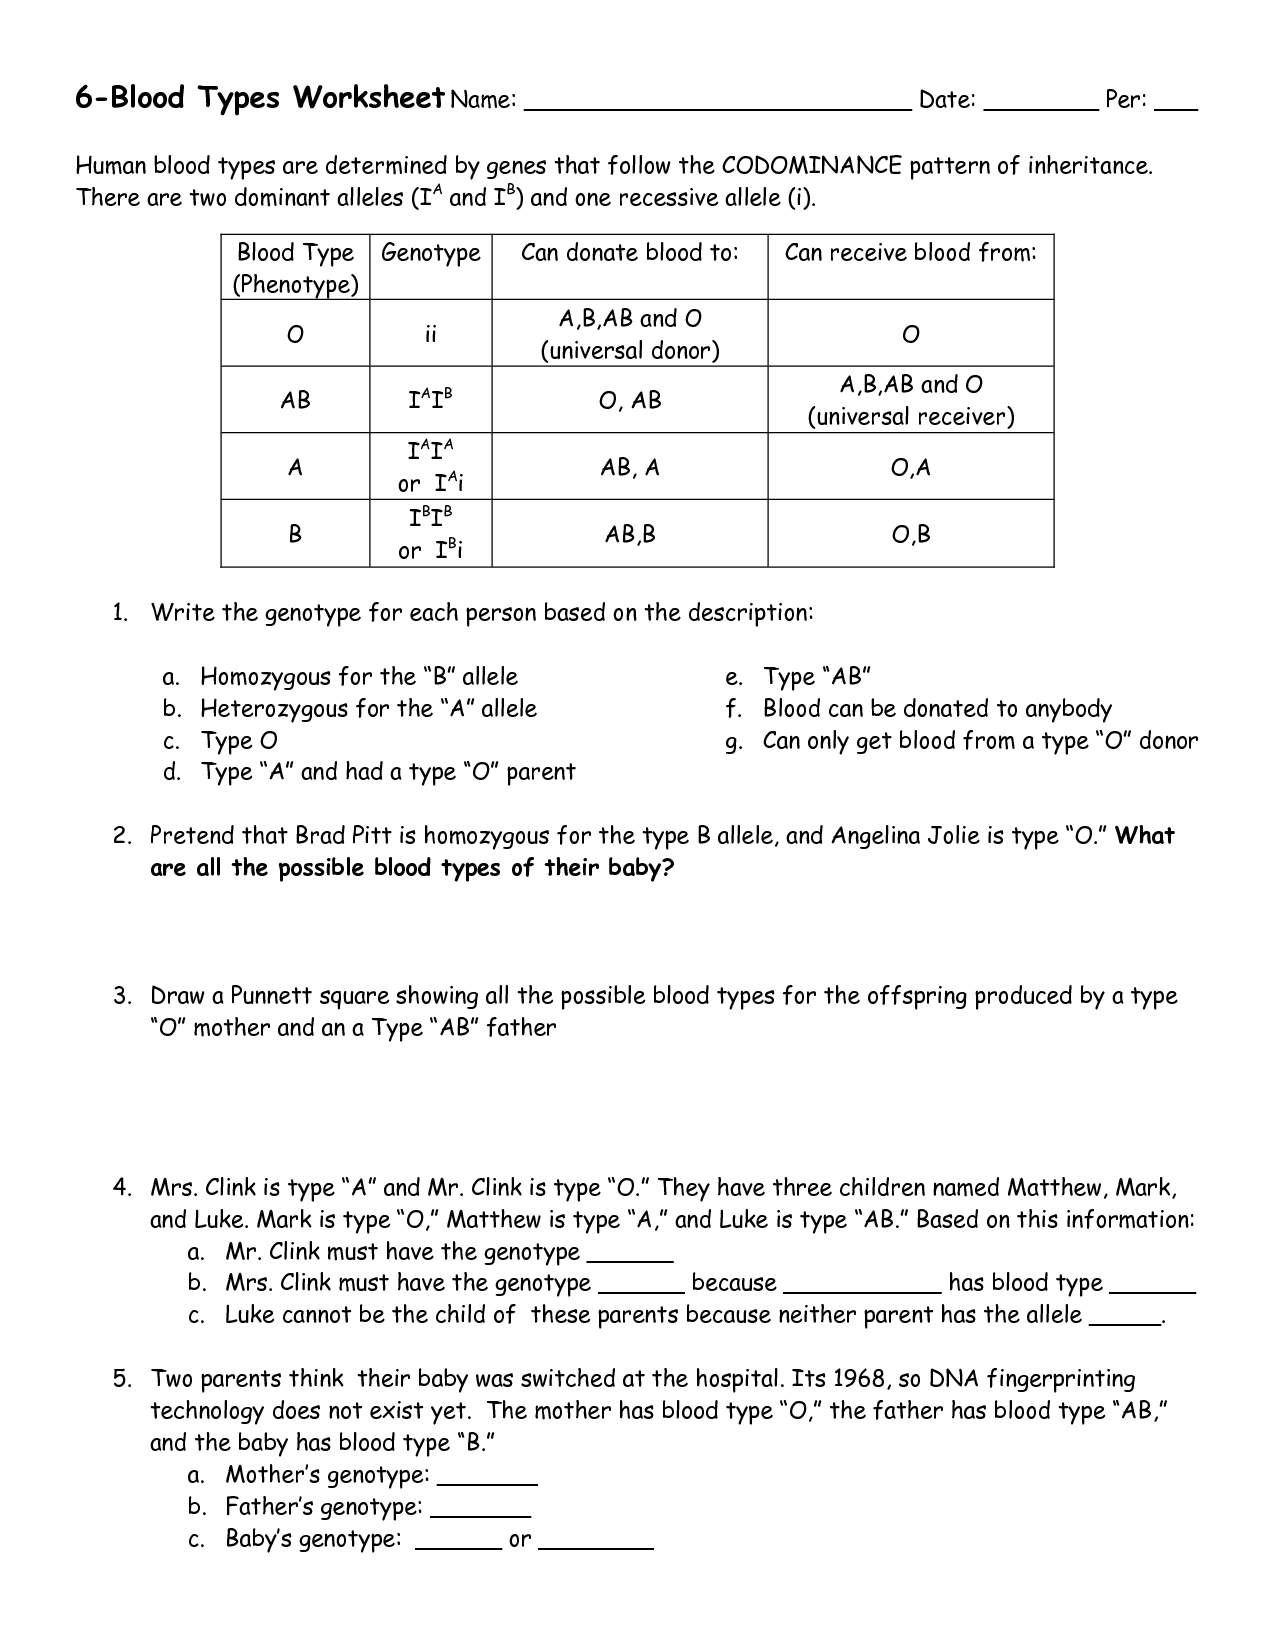 16-best-images-of-blood-type-worksheet-answer-key-codominance-worksheet-blood-types-blood